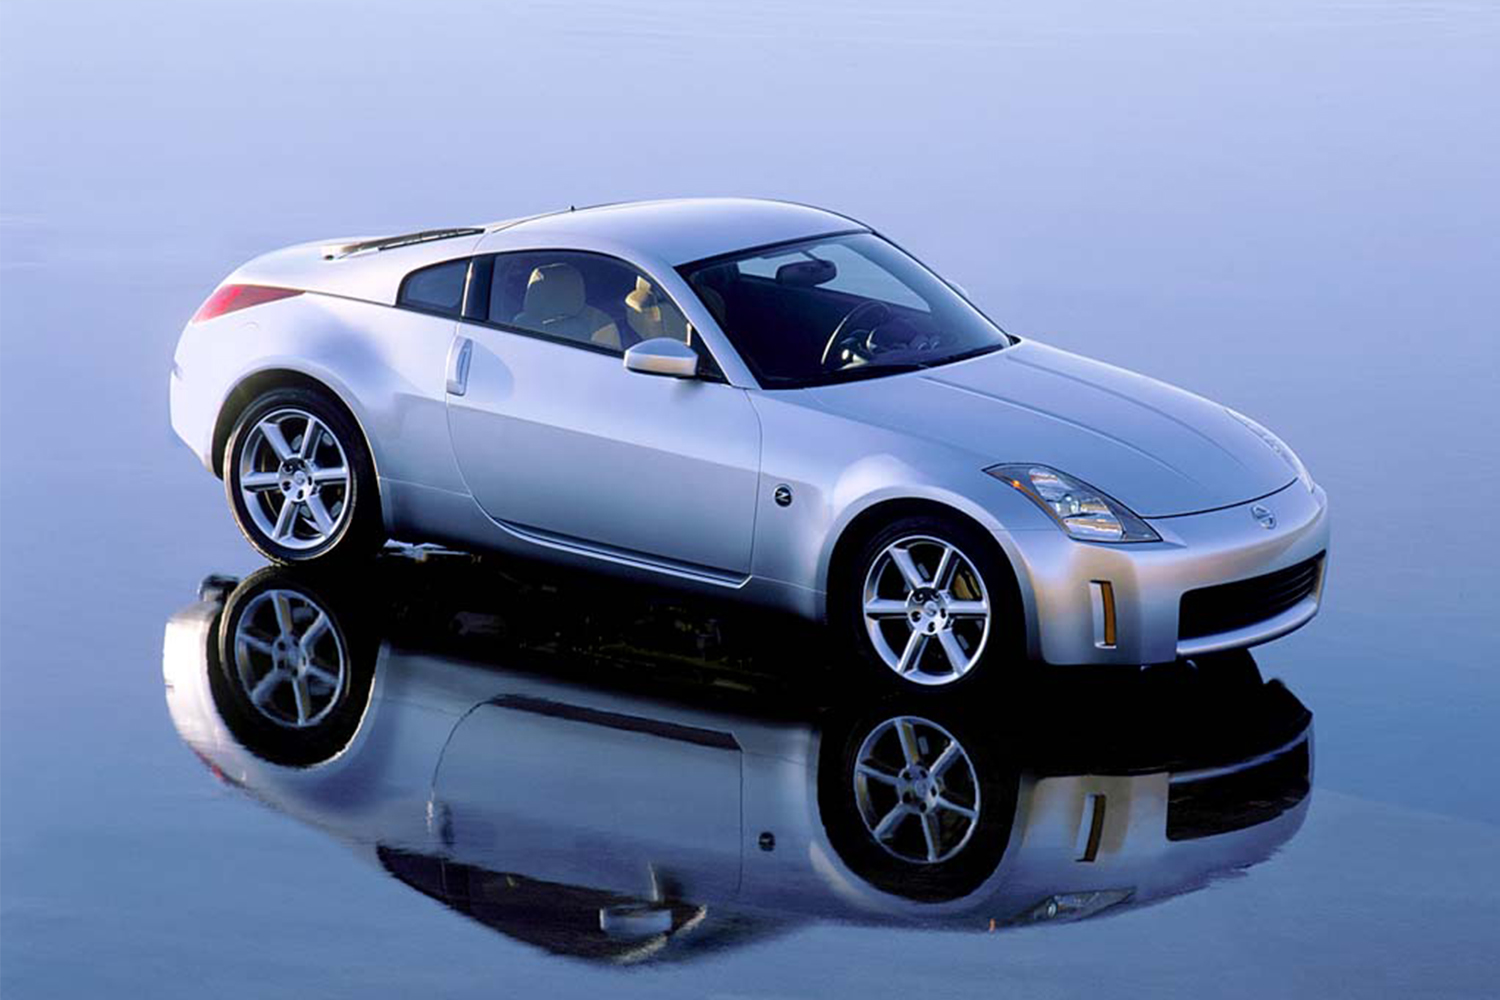 The Nissan 350Z Coupe, a modern classic car that's hugely popular